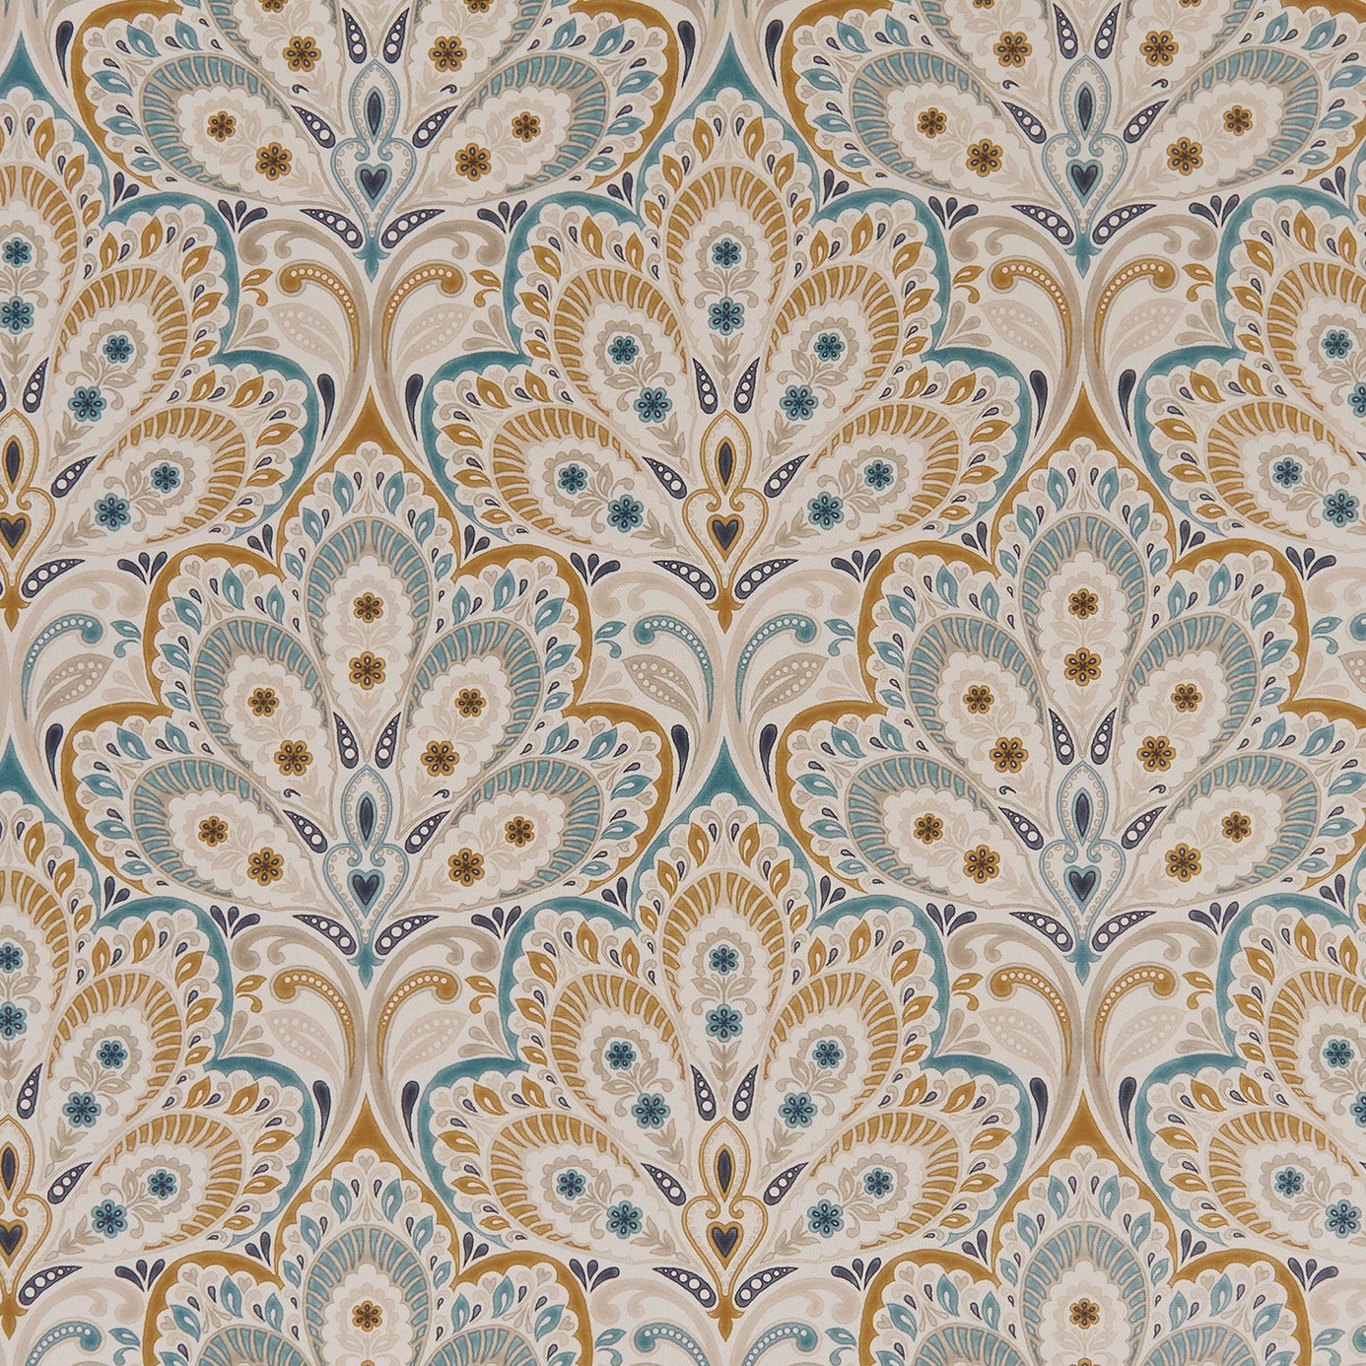 Persia Teal/Spice Fabric by CNC